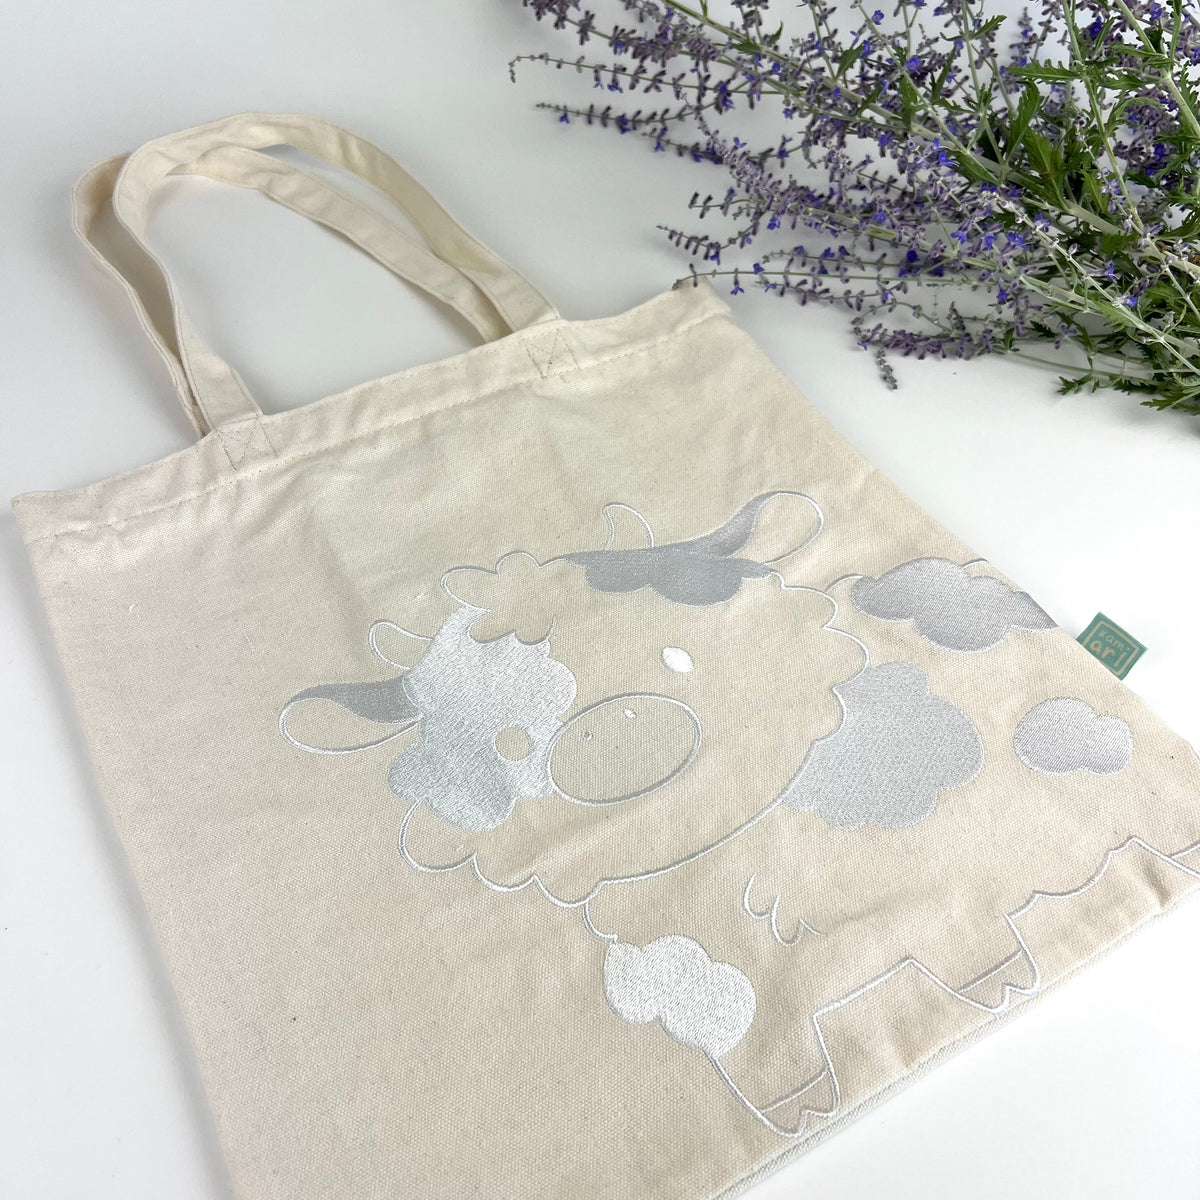 Embroidered Fluffy Cow Tote Bag